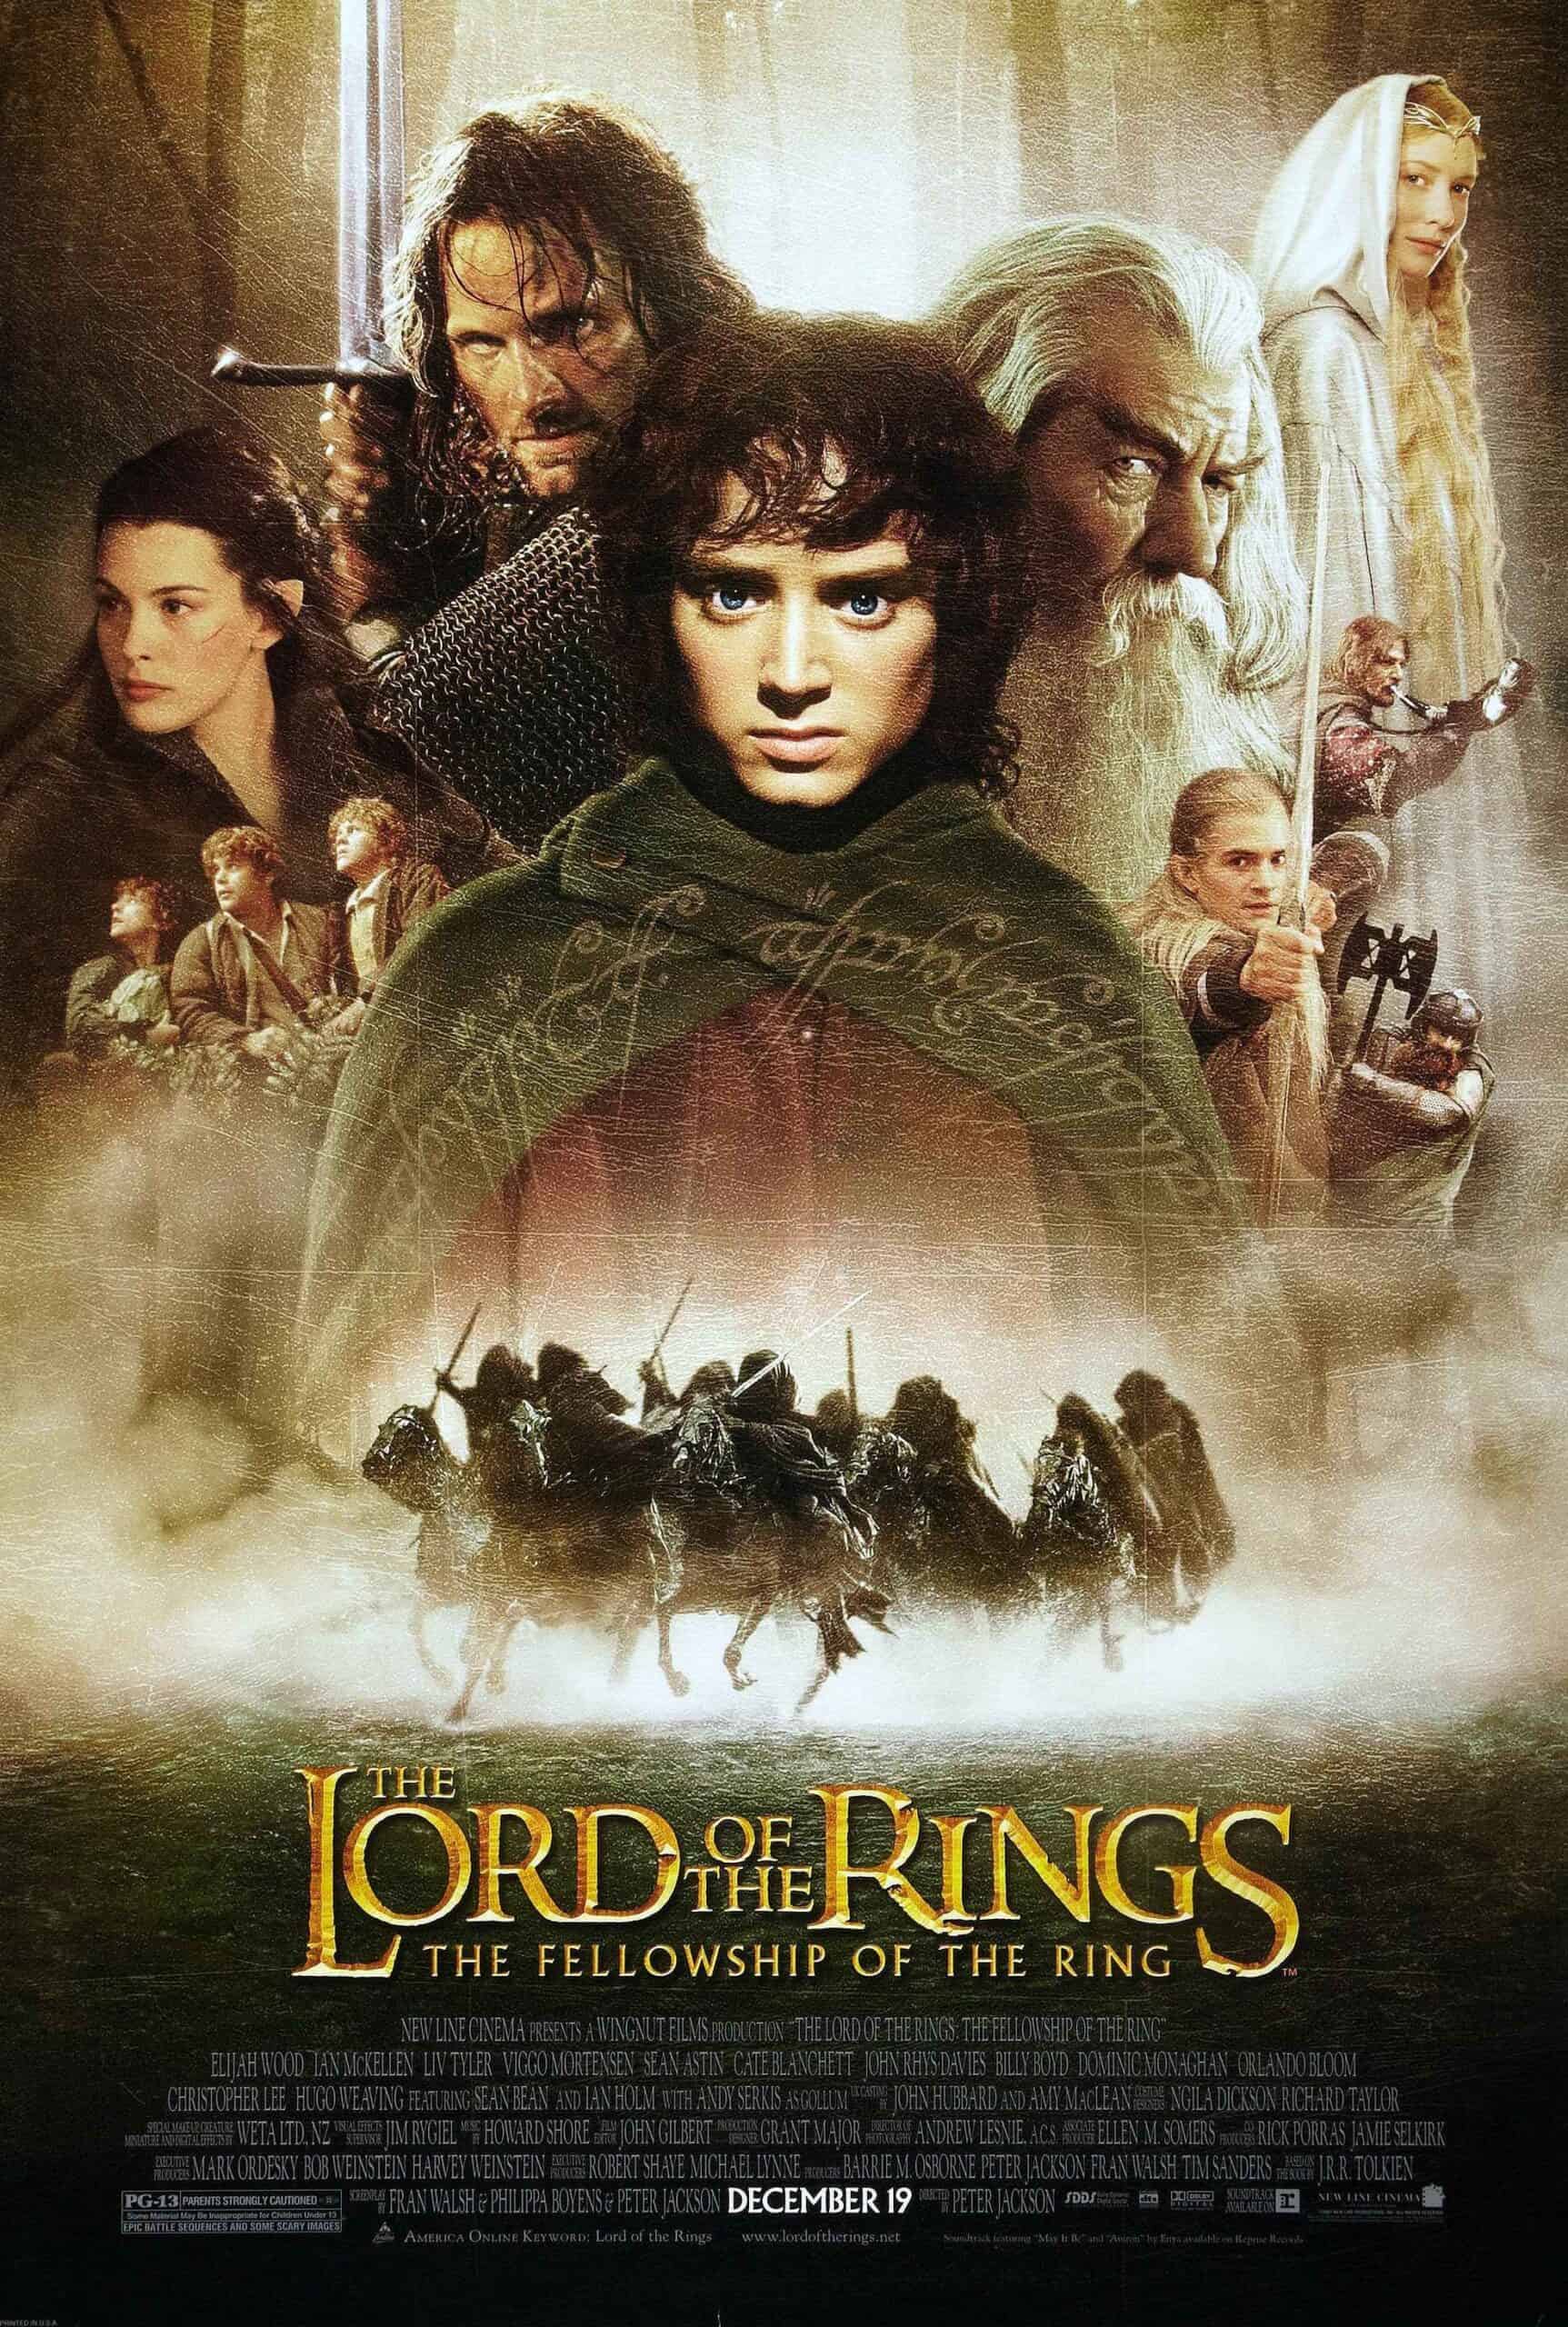 The Lord of the Rings turns 20: Why Peter Jackson's film trilogy remains a  cinematic miracle | Hollywood News - The Indian Express